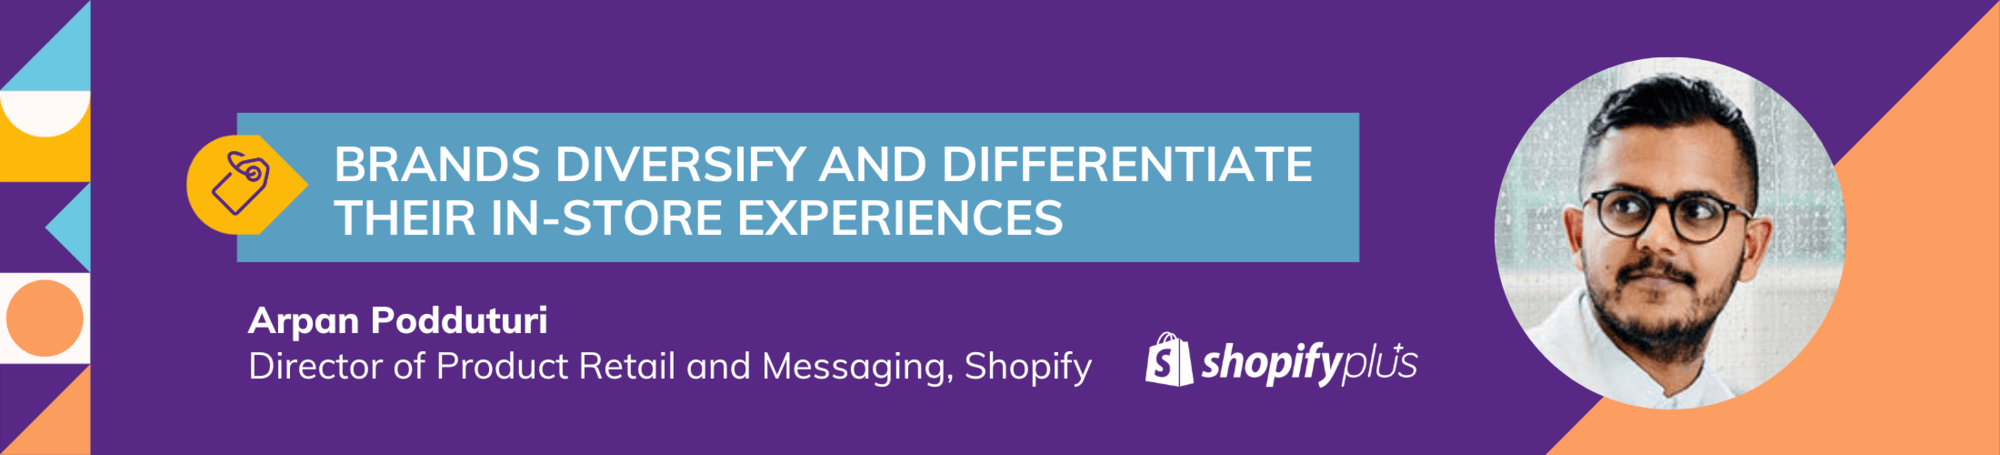 Brands diversify and differentiate their in-store experiences